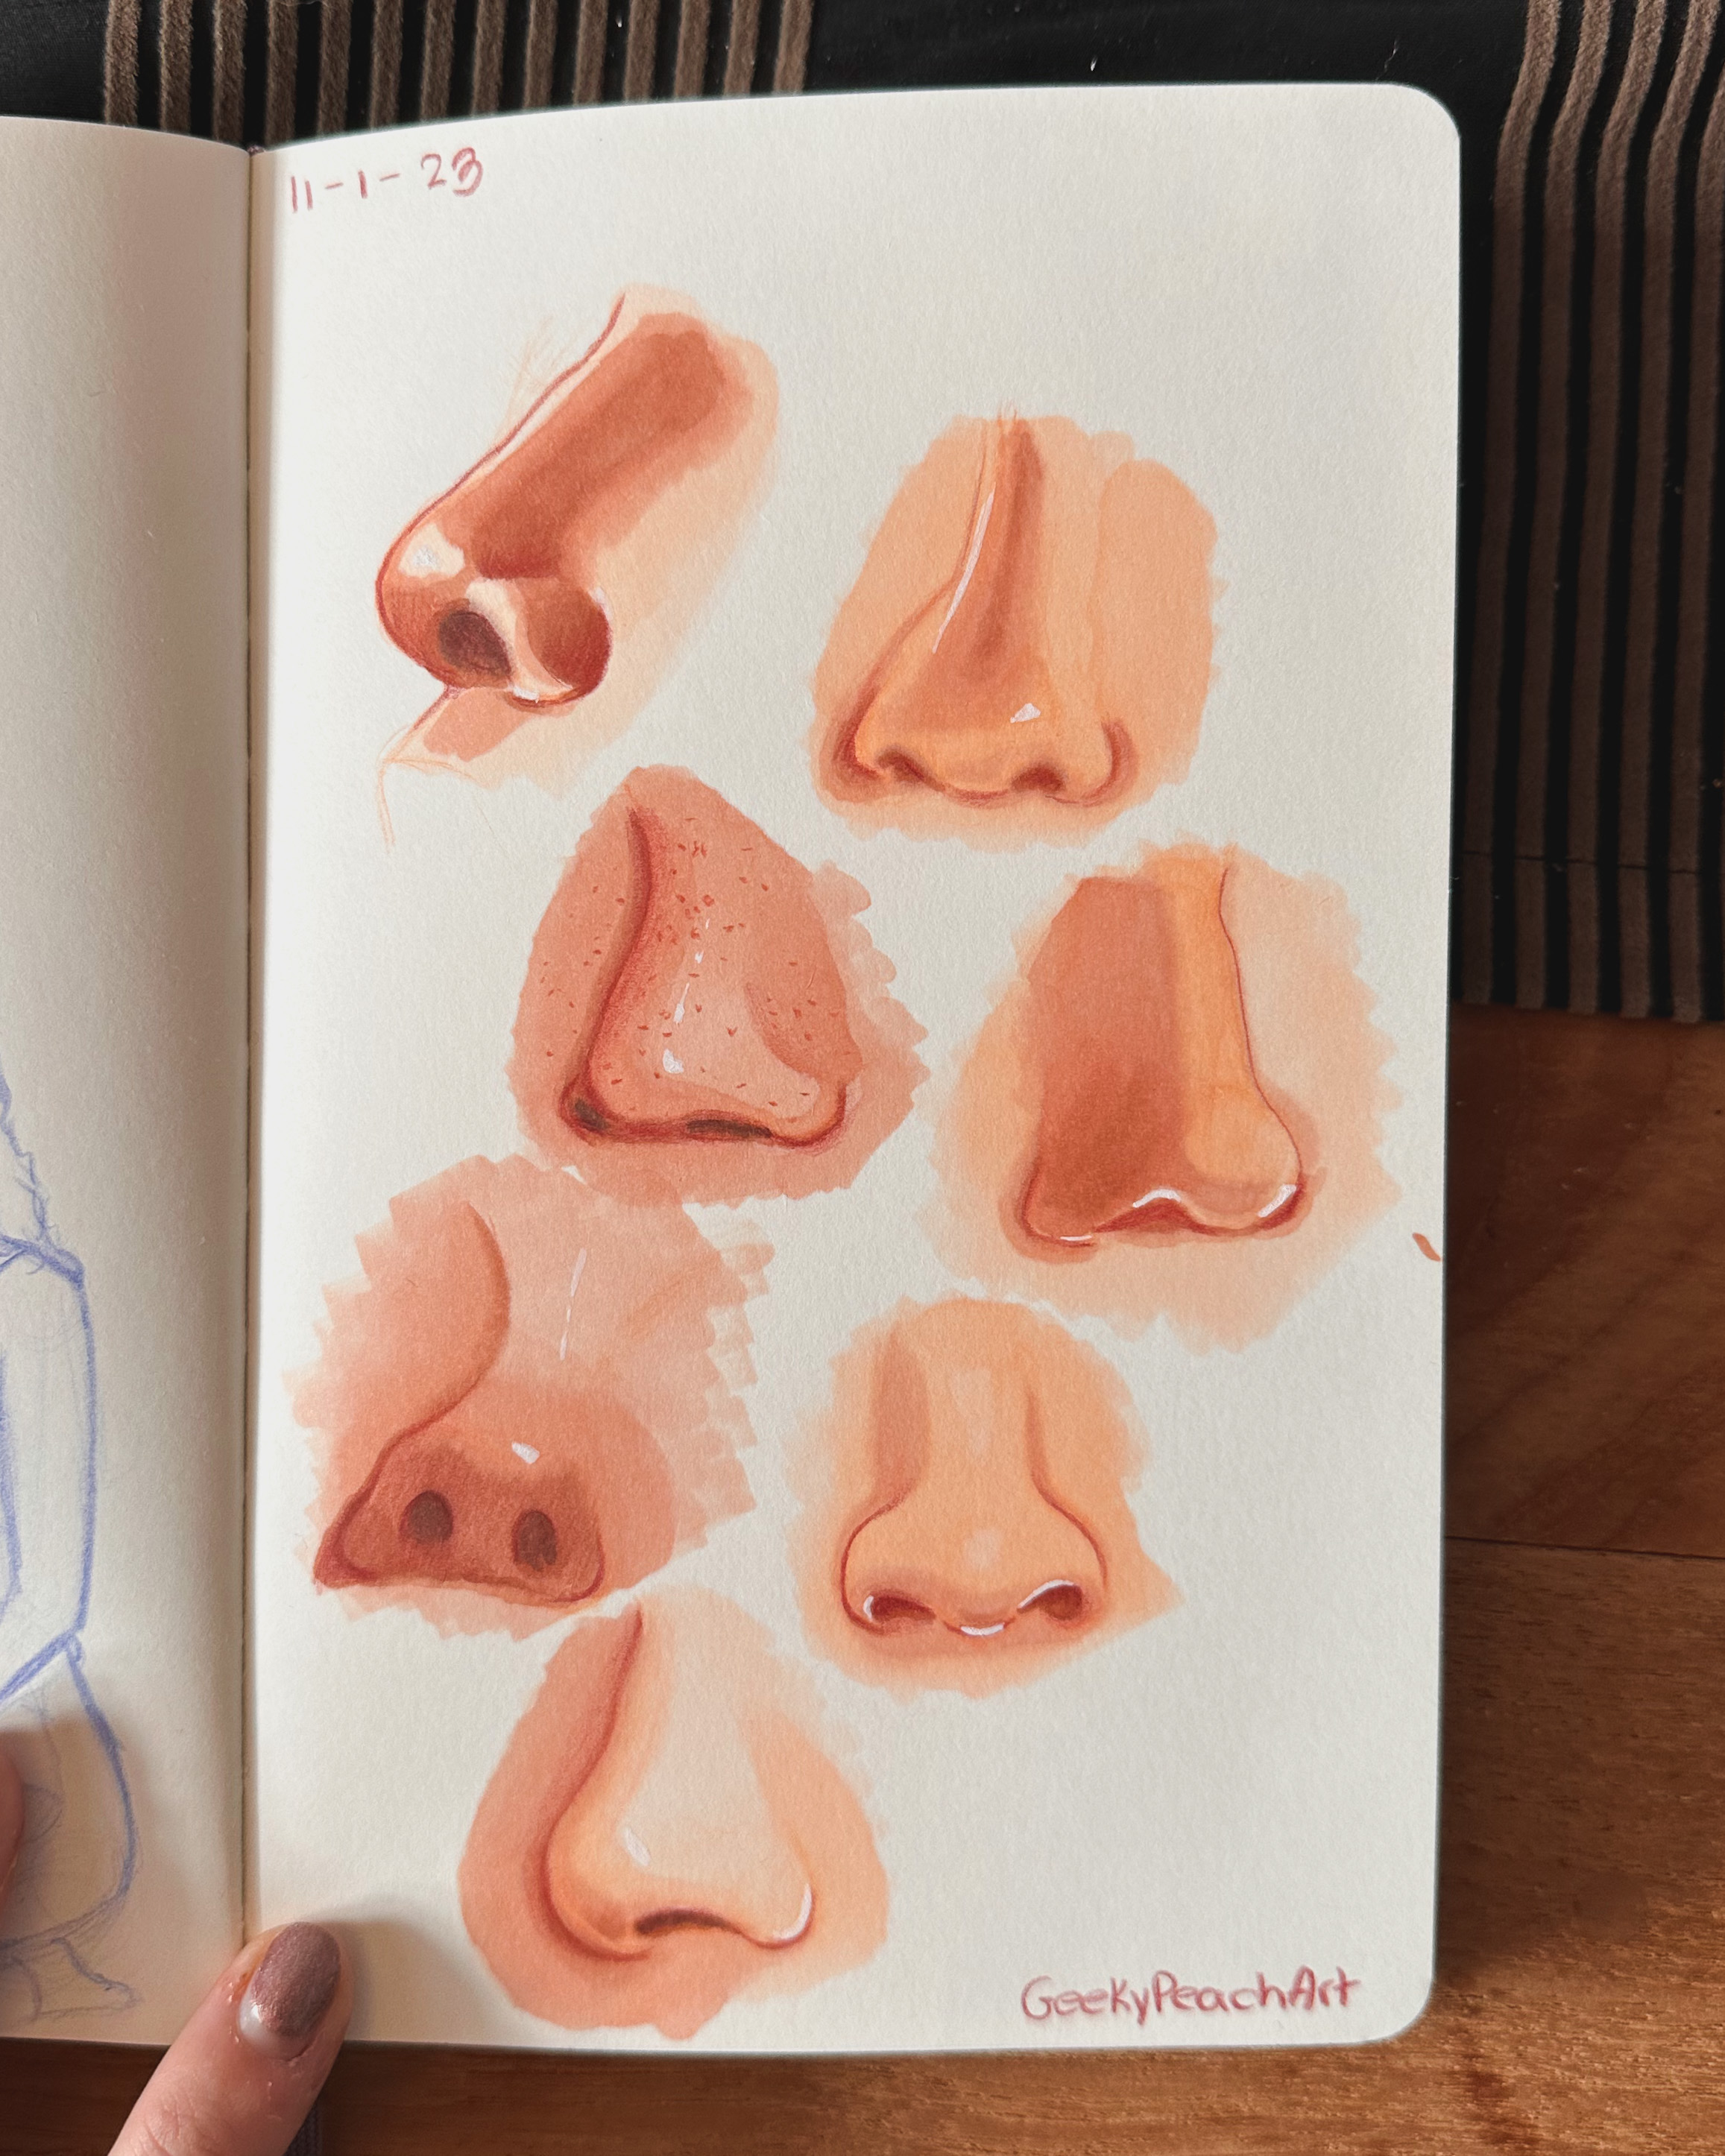 Nose anatomy study in alcohol markers by GeekyPeachArt on DeviantArt